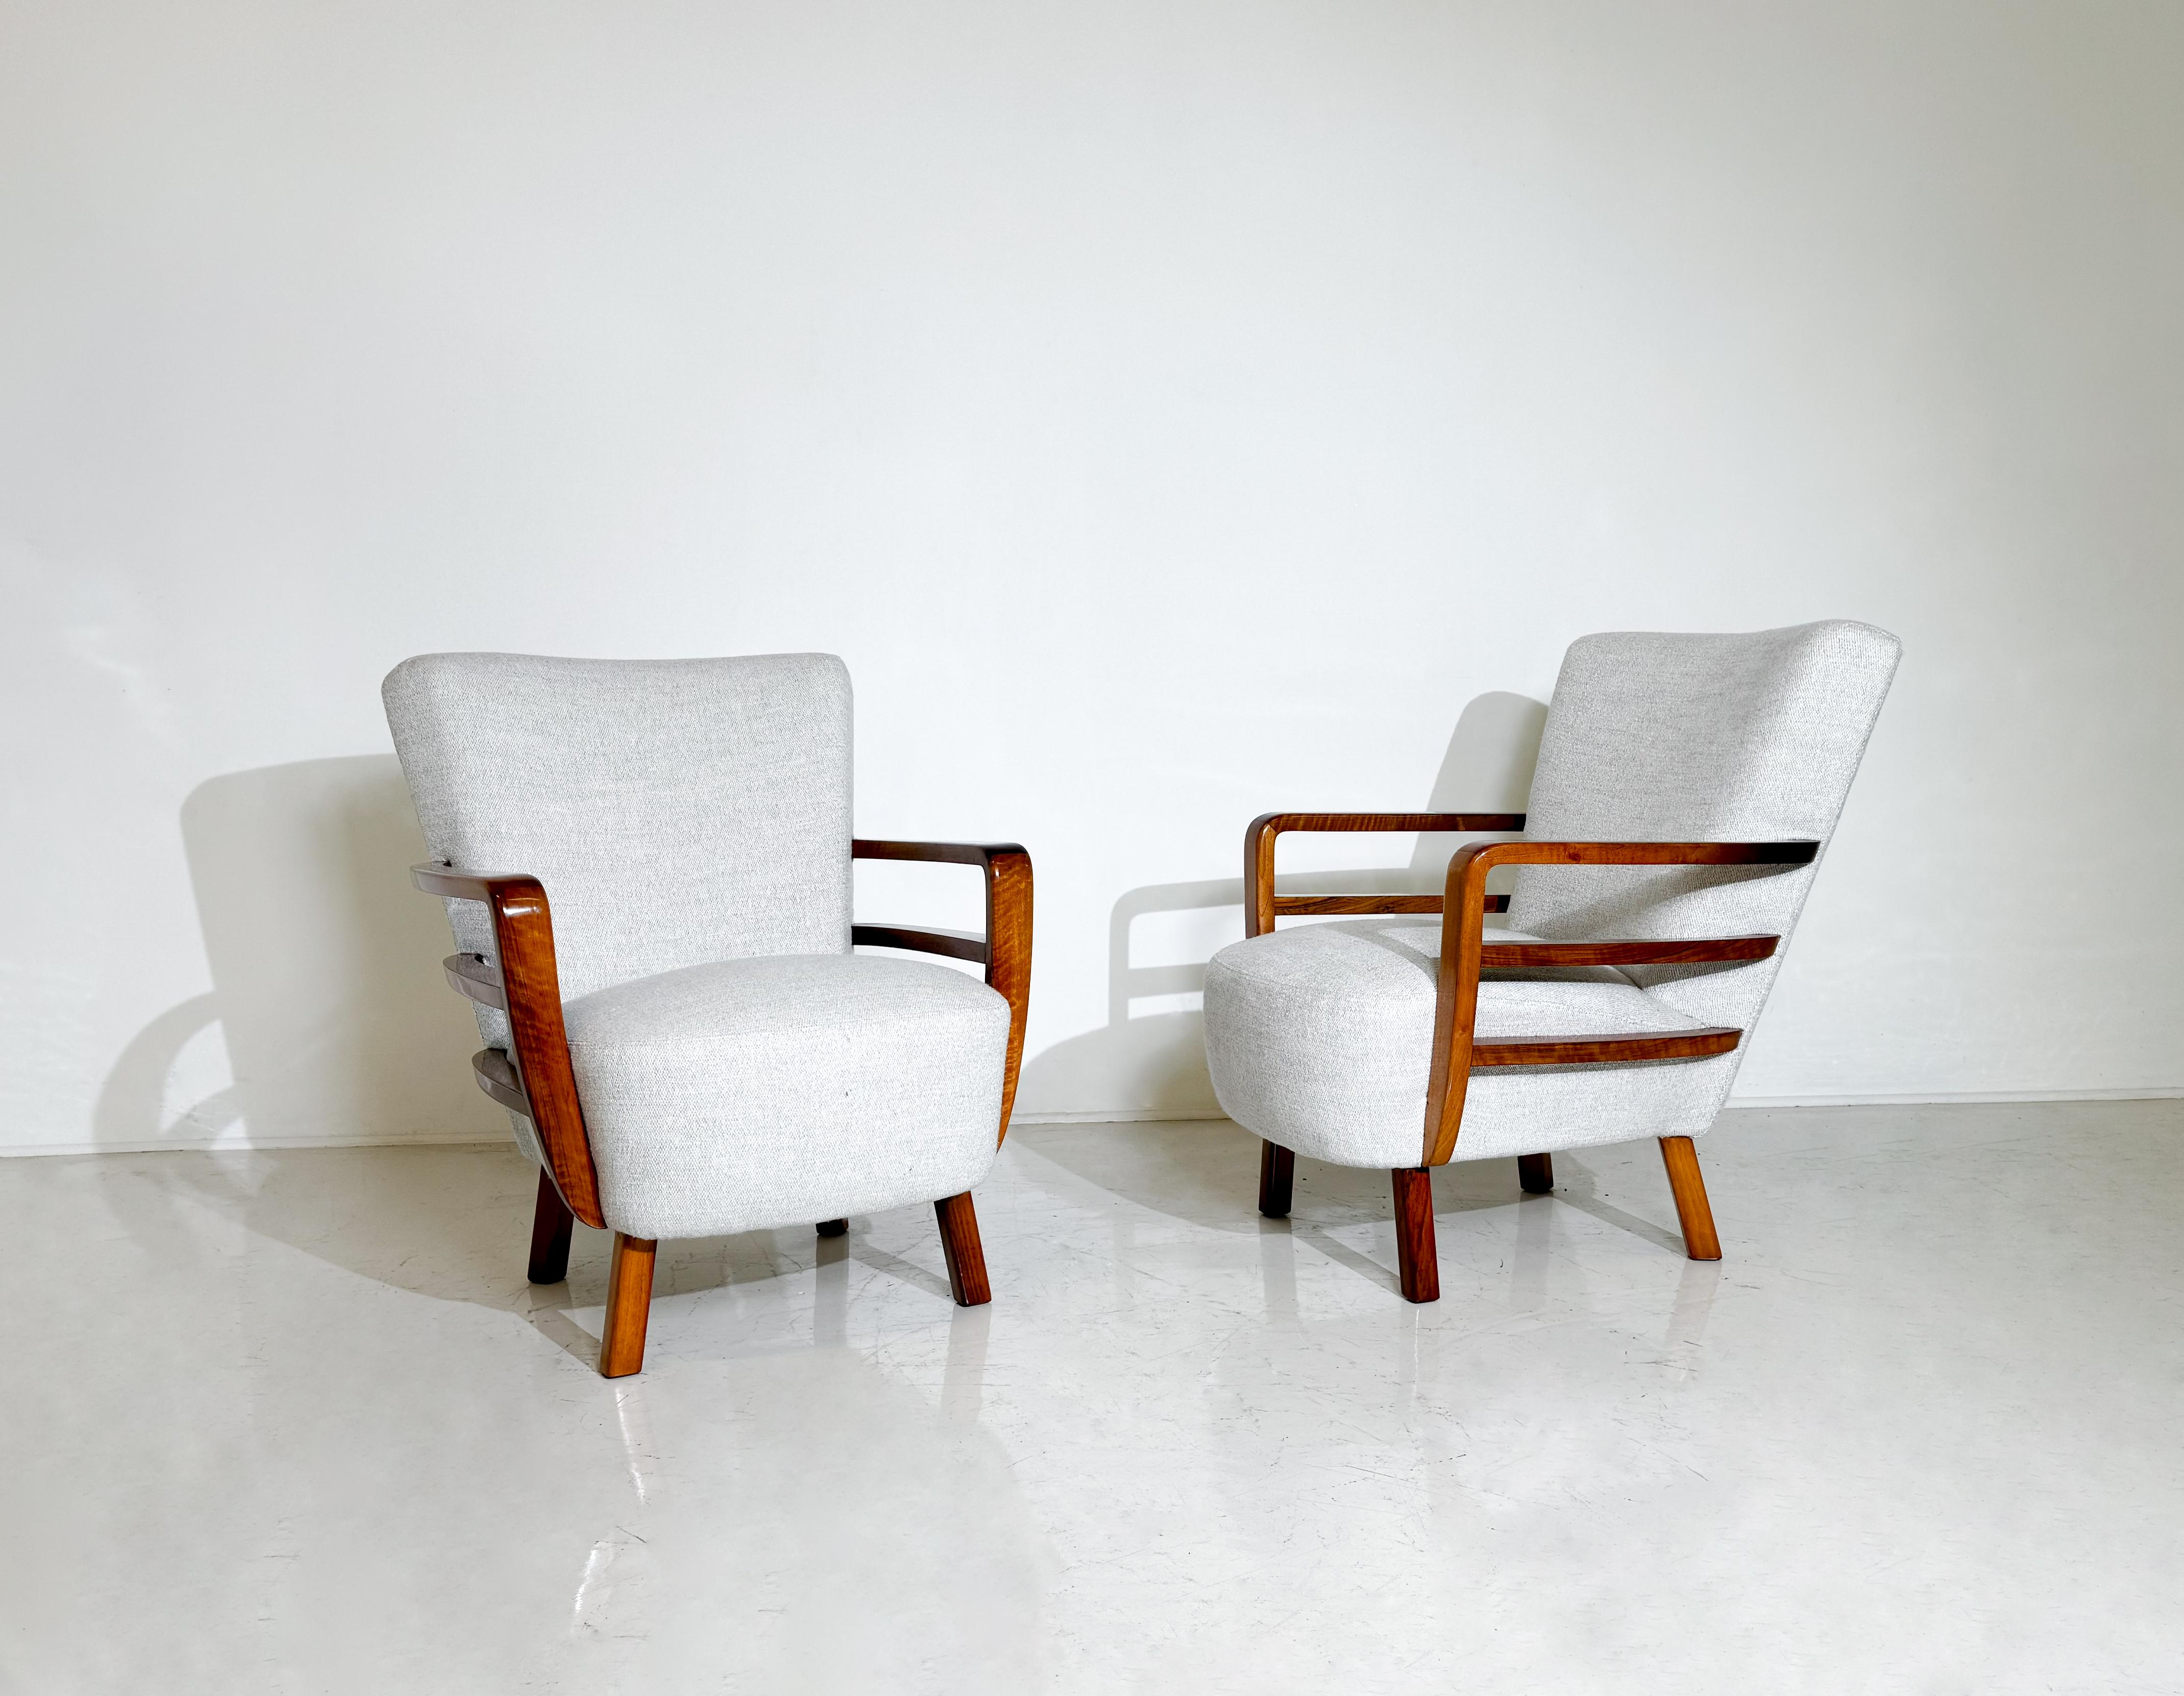 20th Century Pair of Art Deco Armchairs, Walnut, Hungary - New Upholstery For Sale